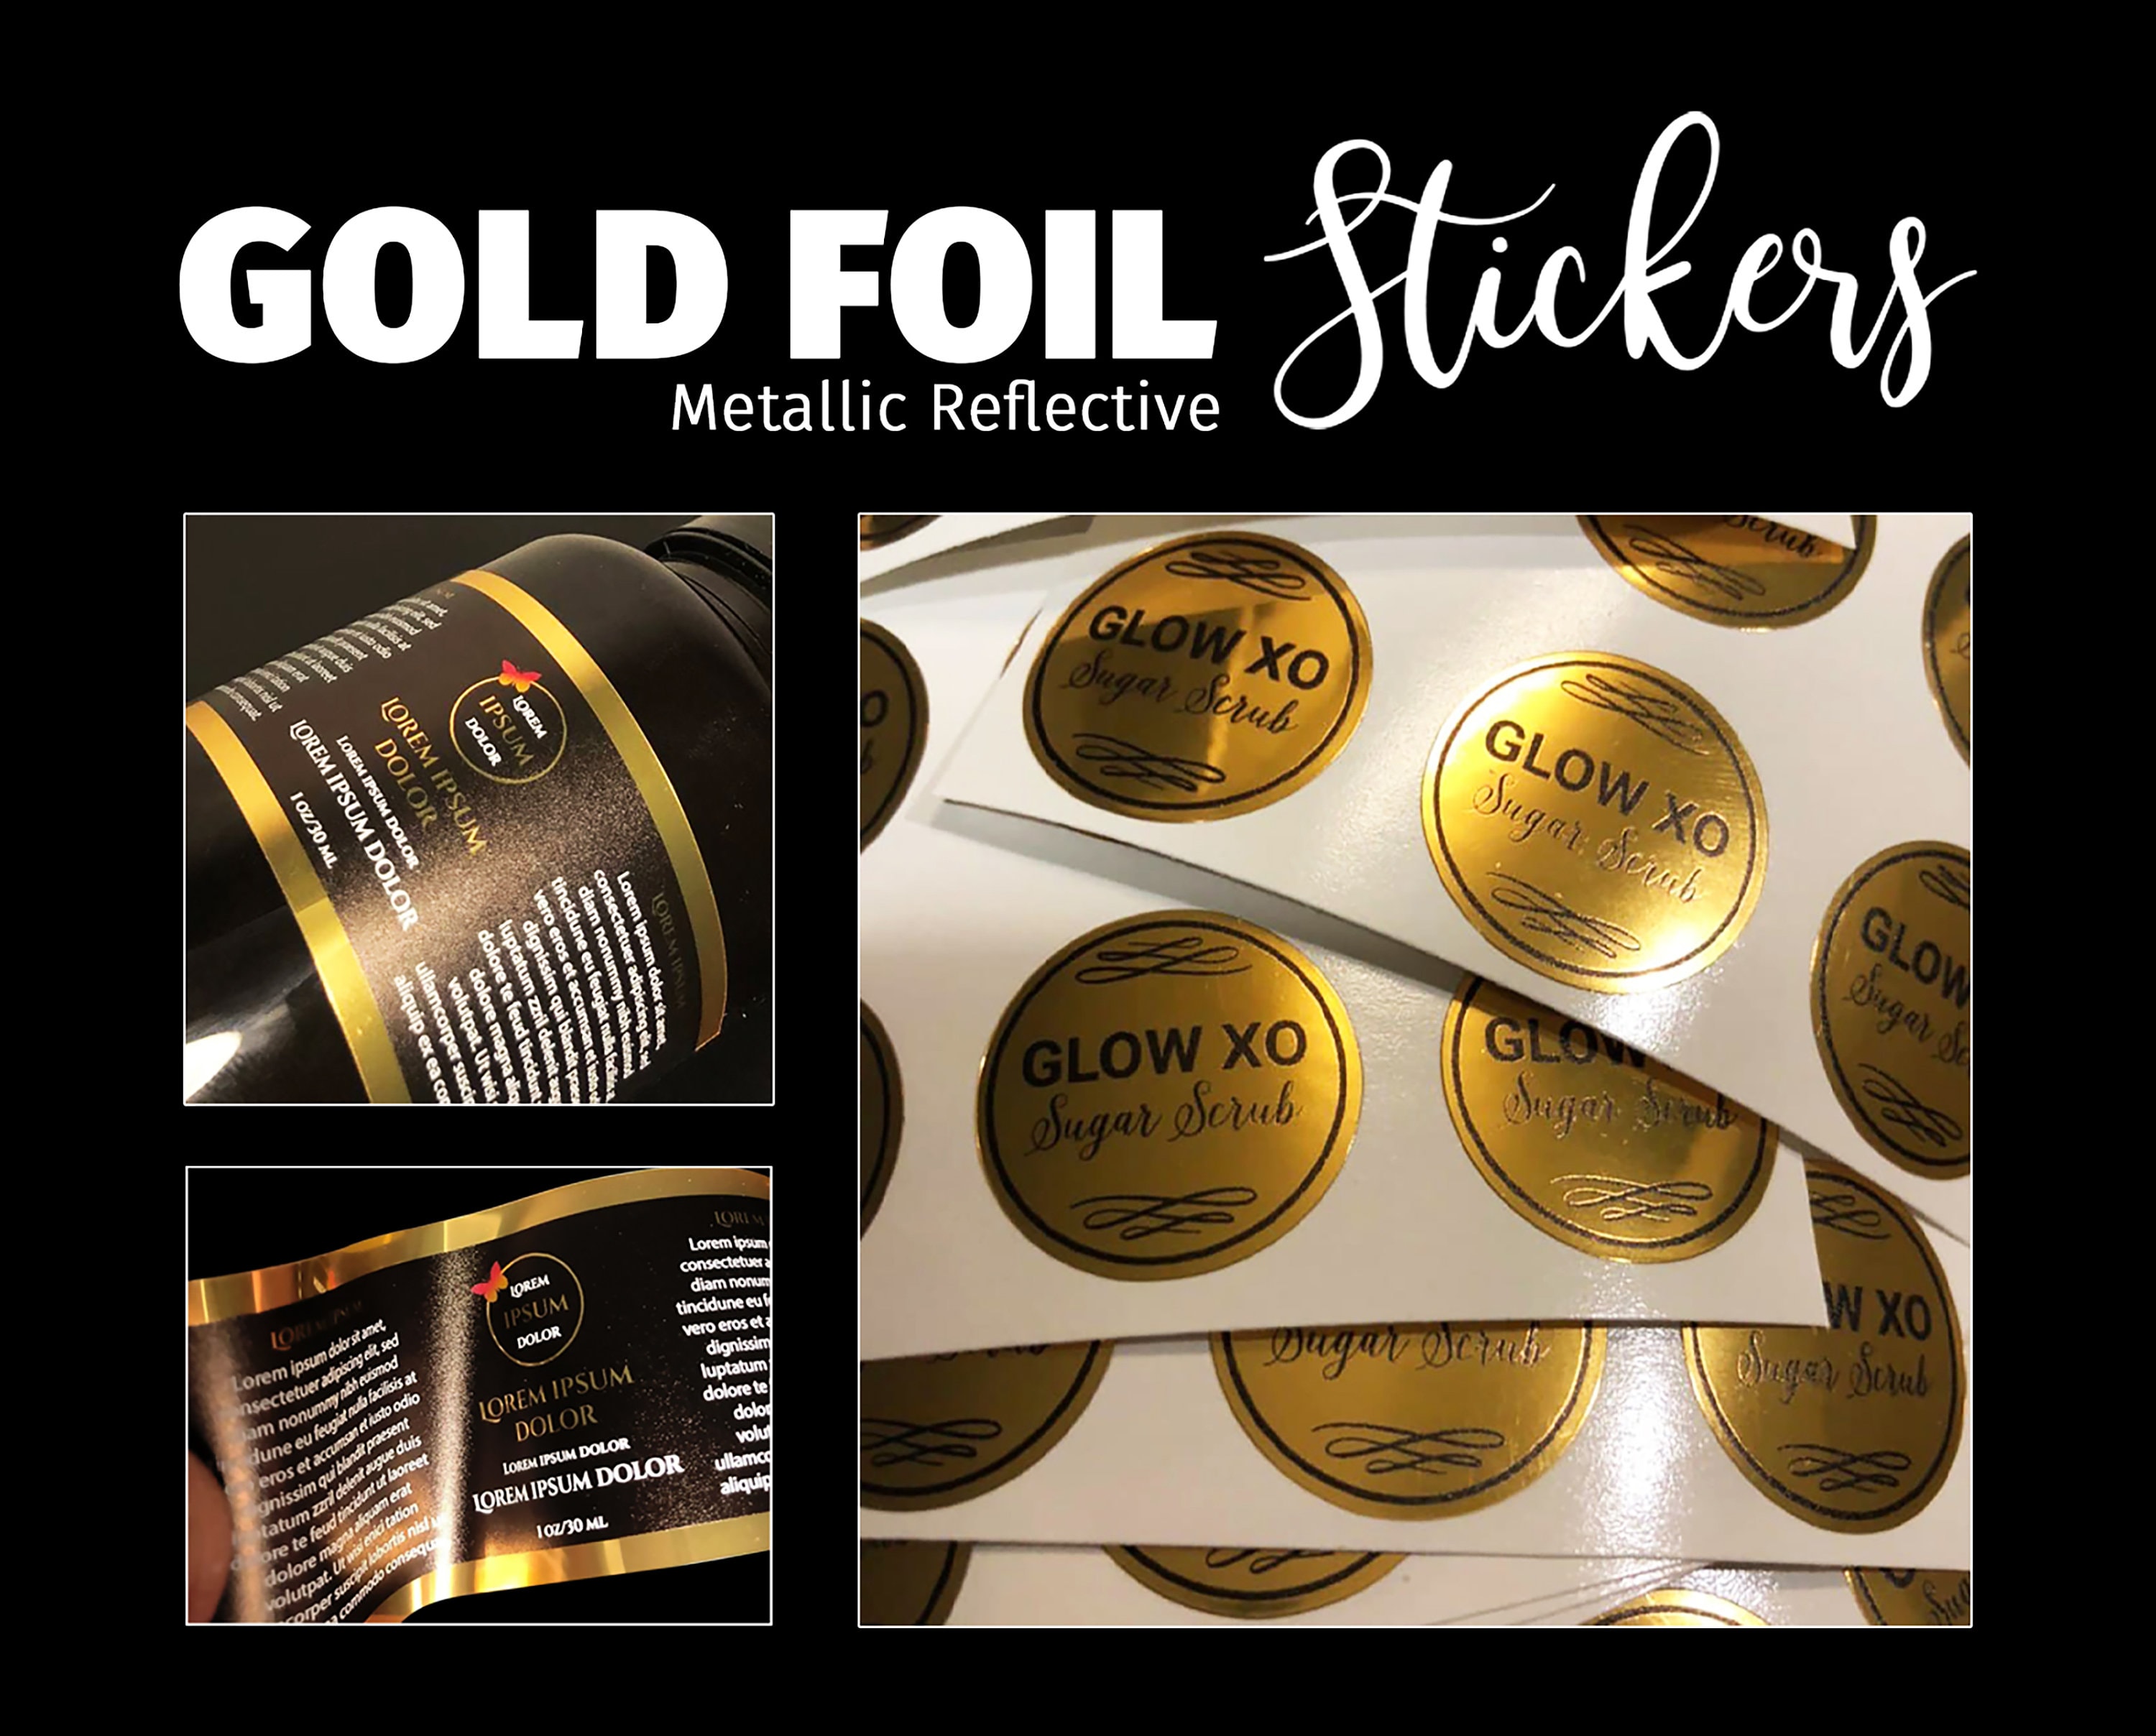 GOLD FOIL STICKERS